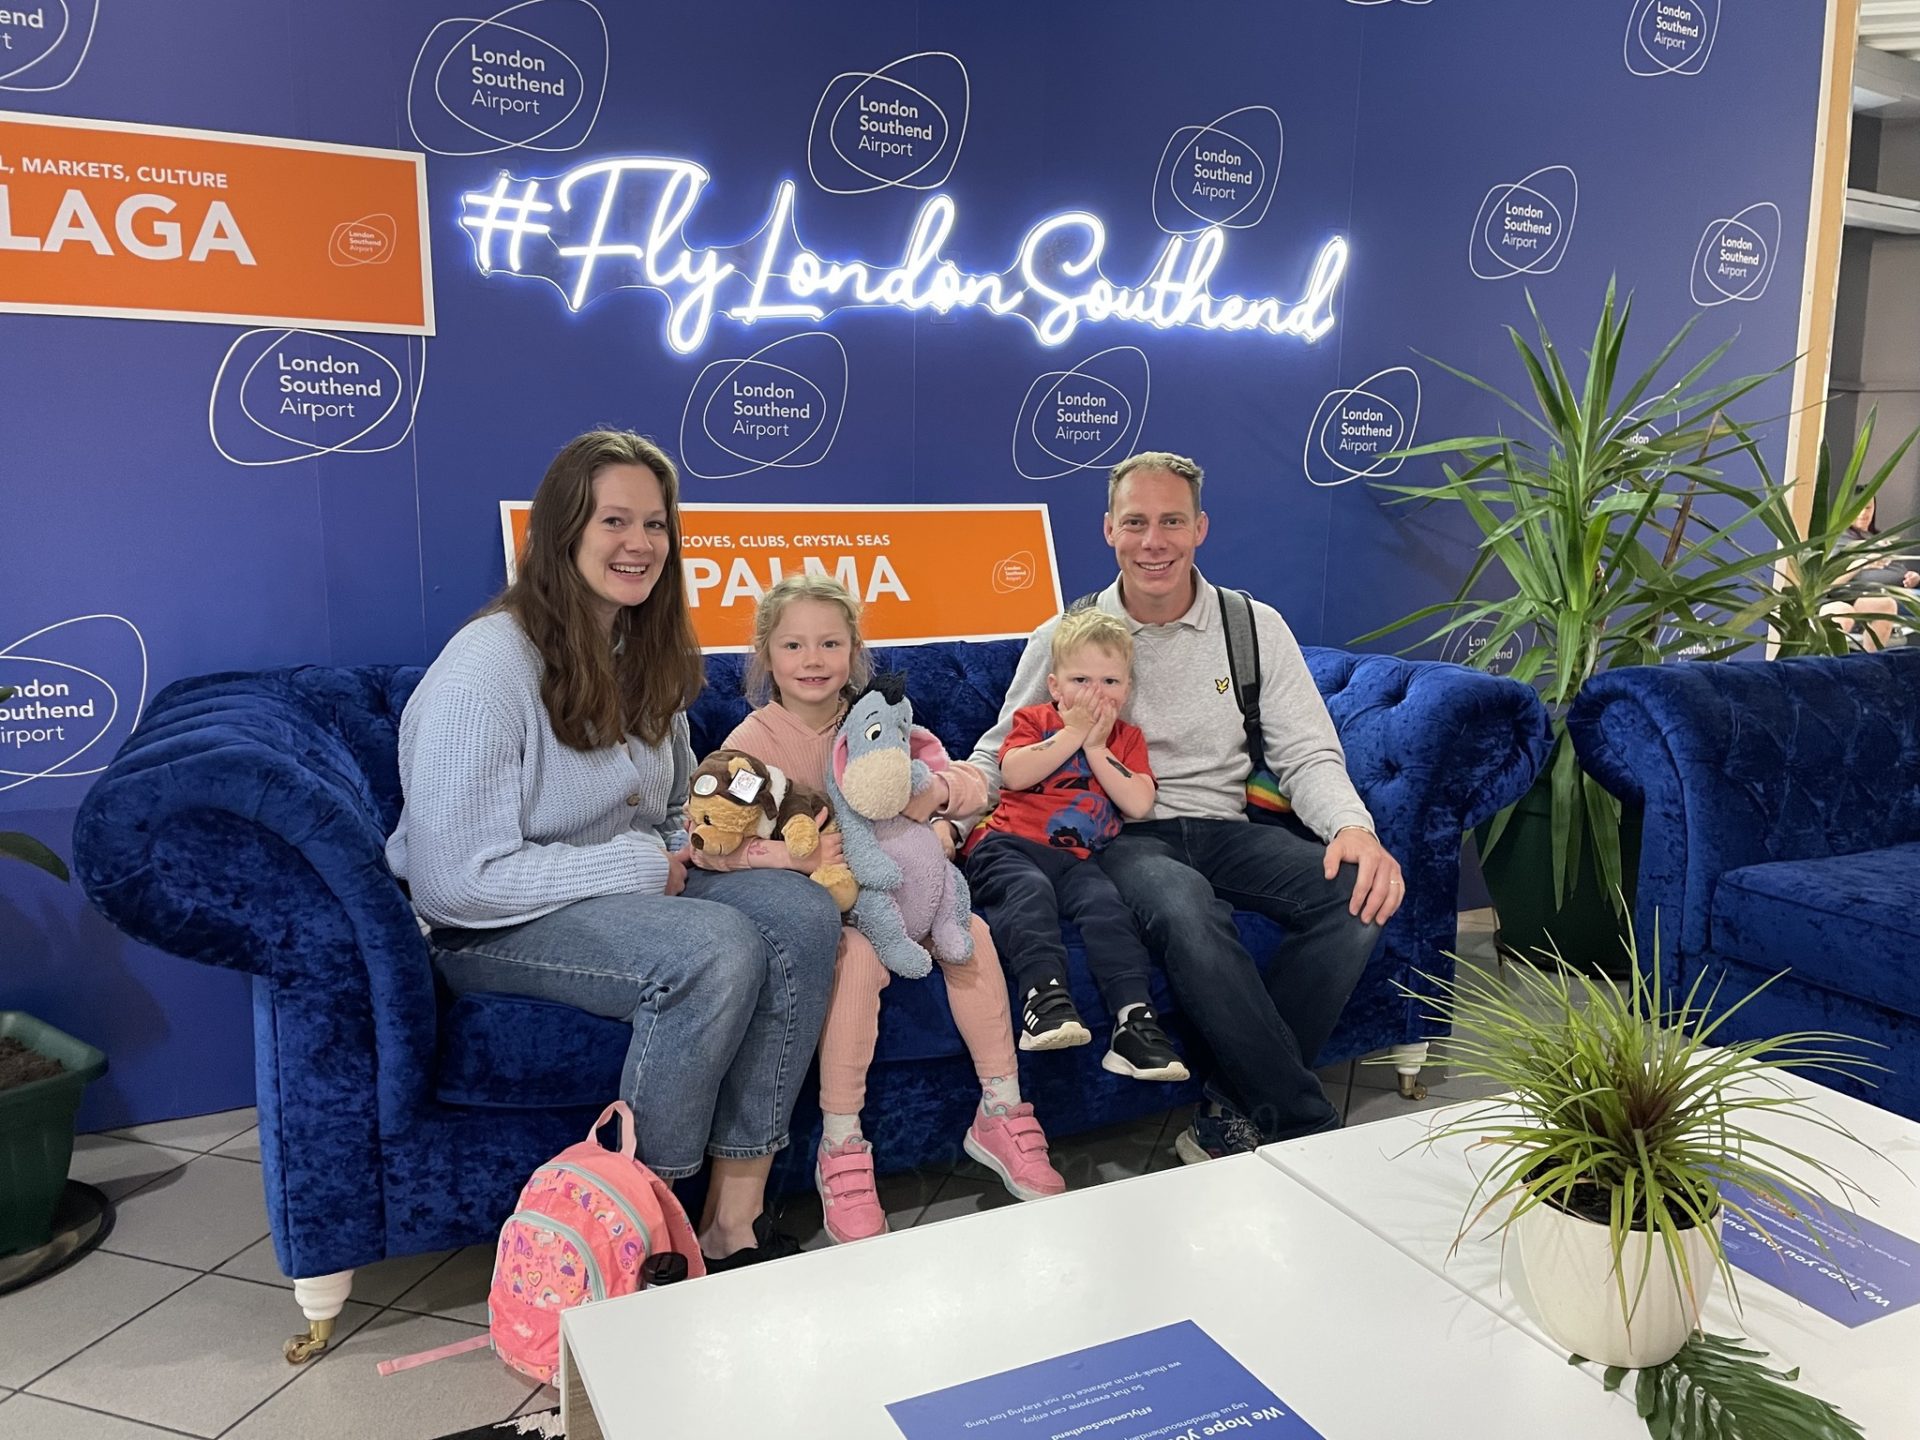 A family of passengers celebrating the launch of flights to Palma de Mallorca at The Snug, in the Departures Lounge at London Southend Airport